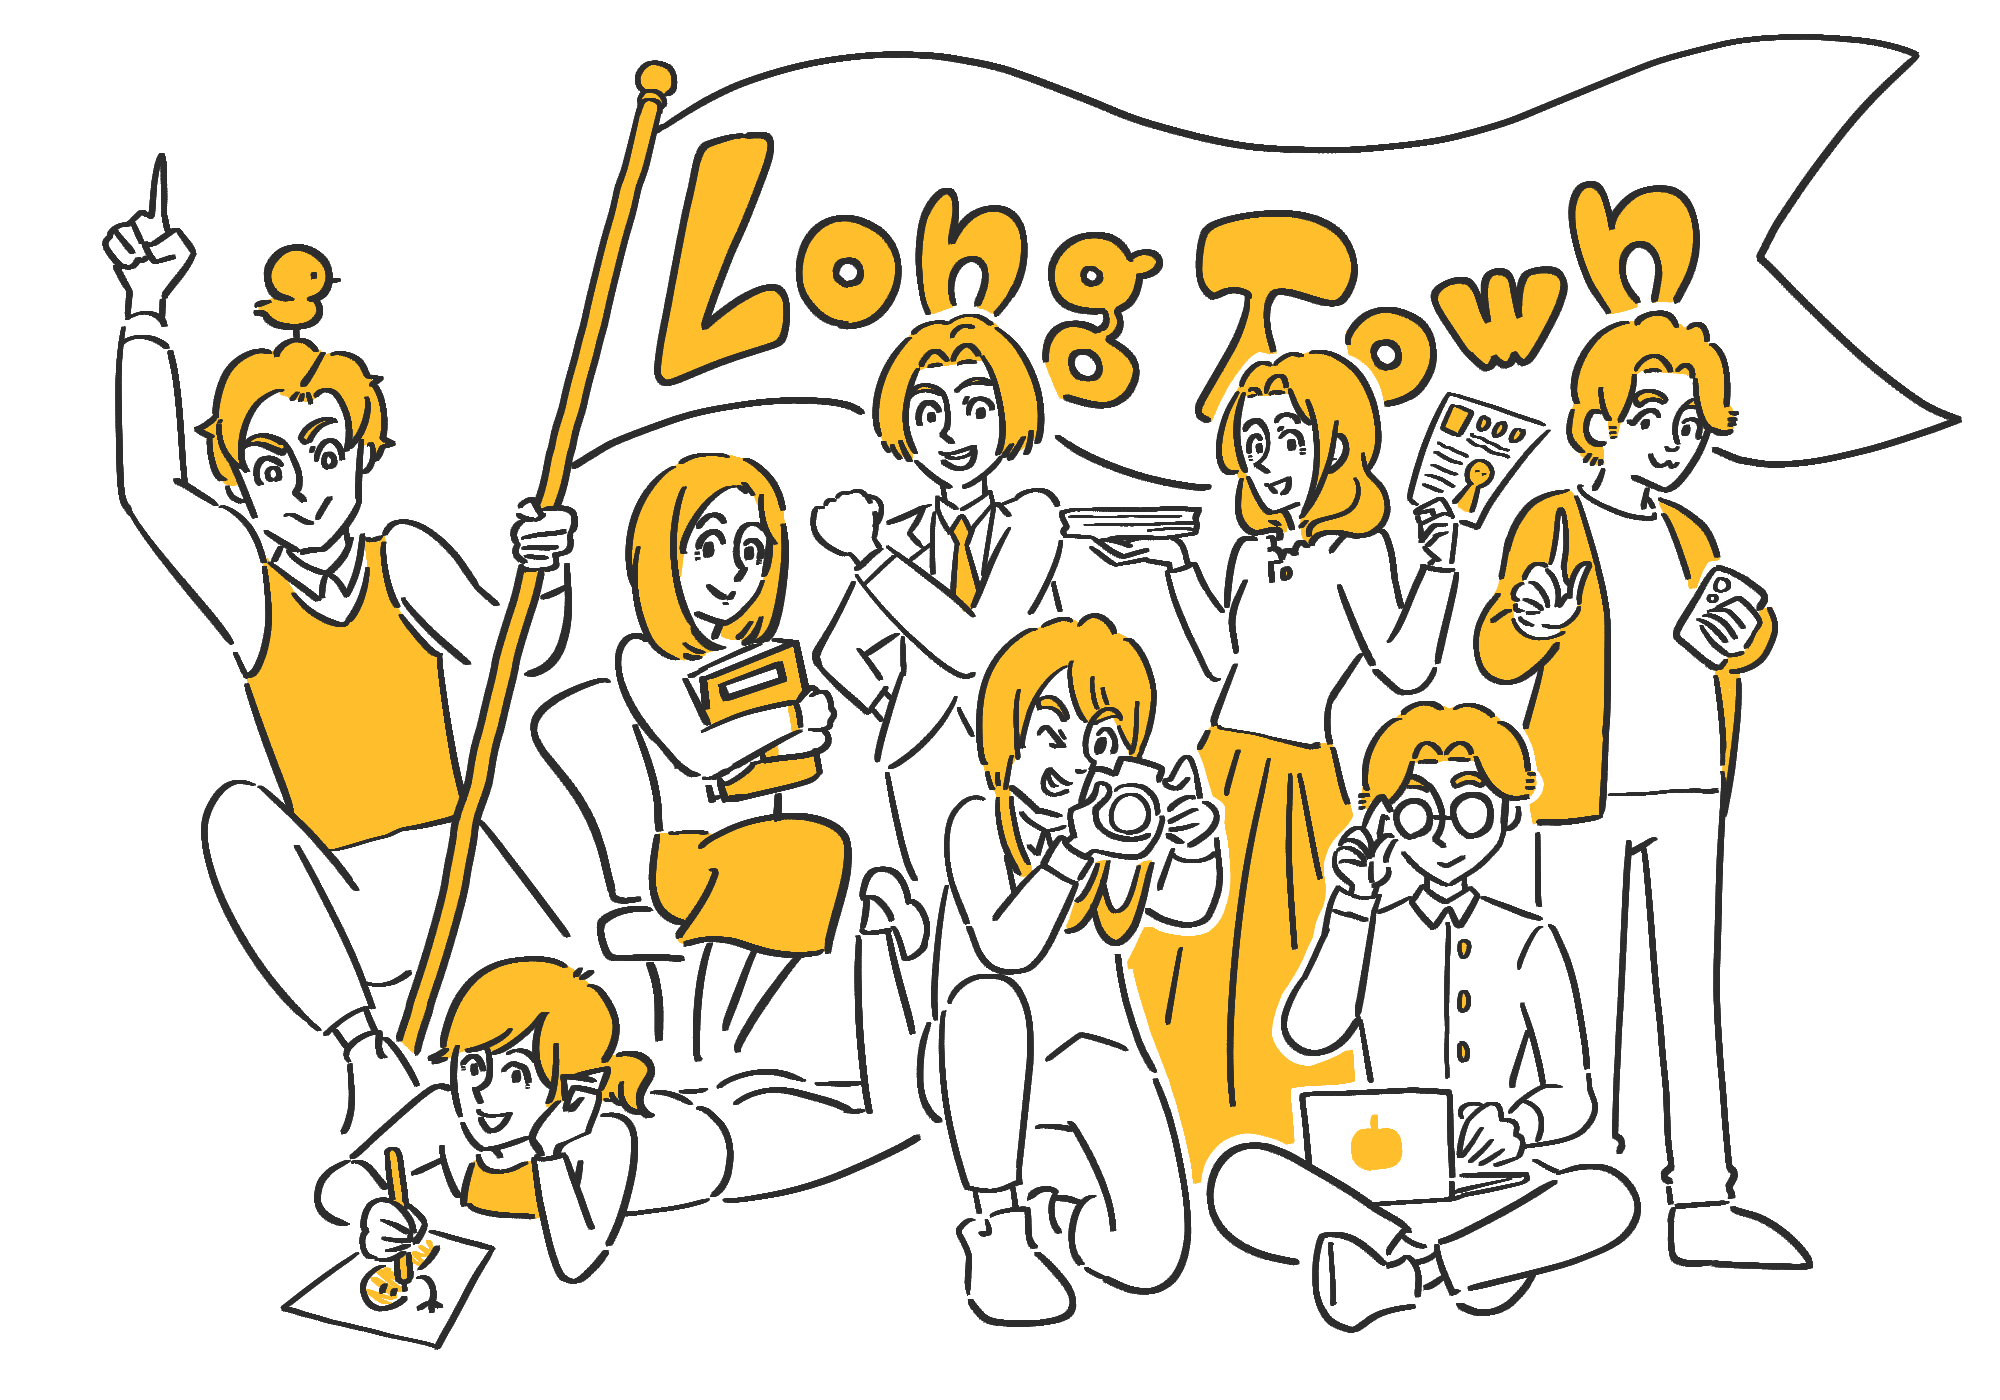 We are Long Town.